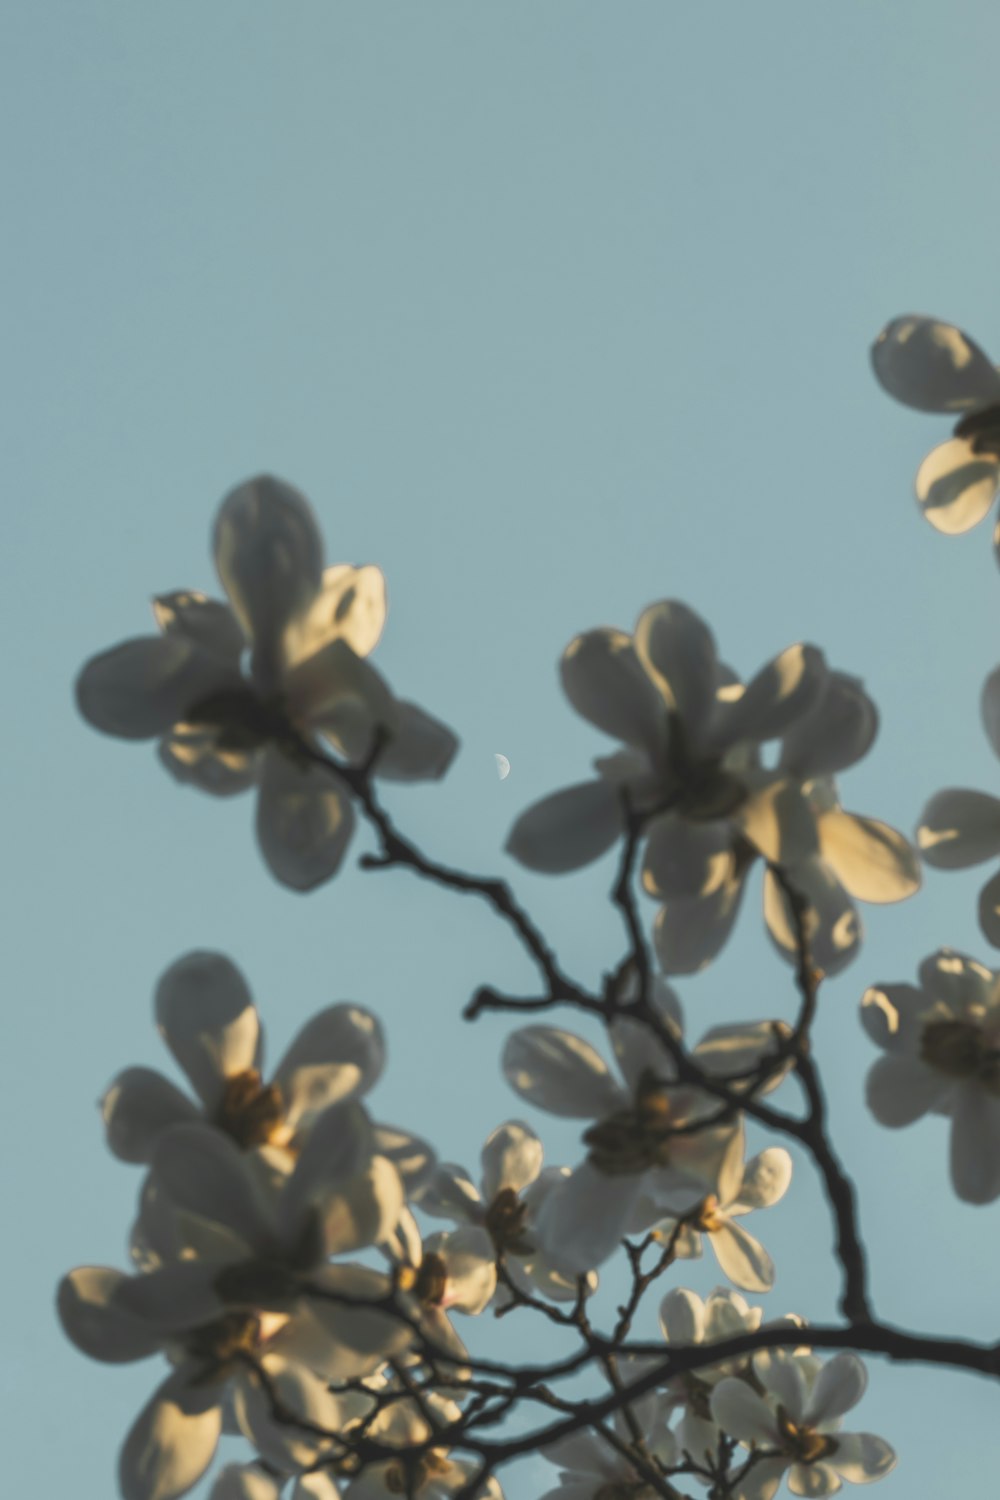 a tree branch with white flowers in the sunlight